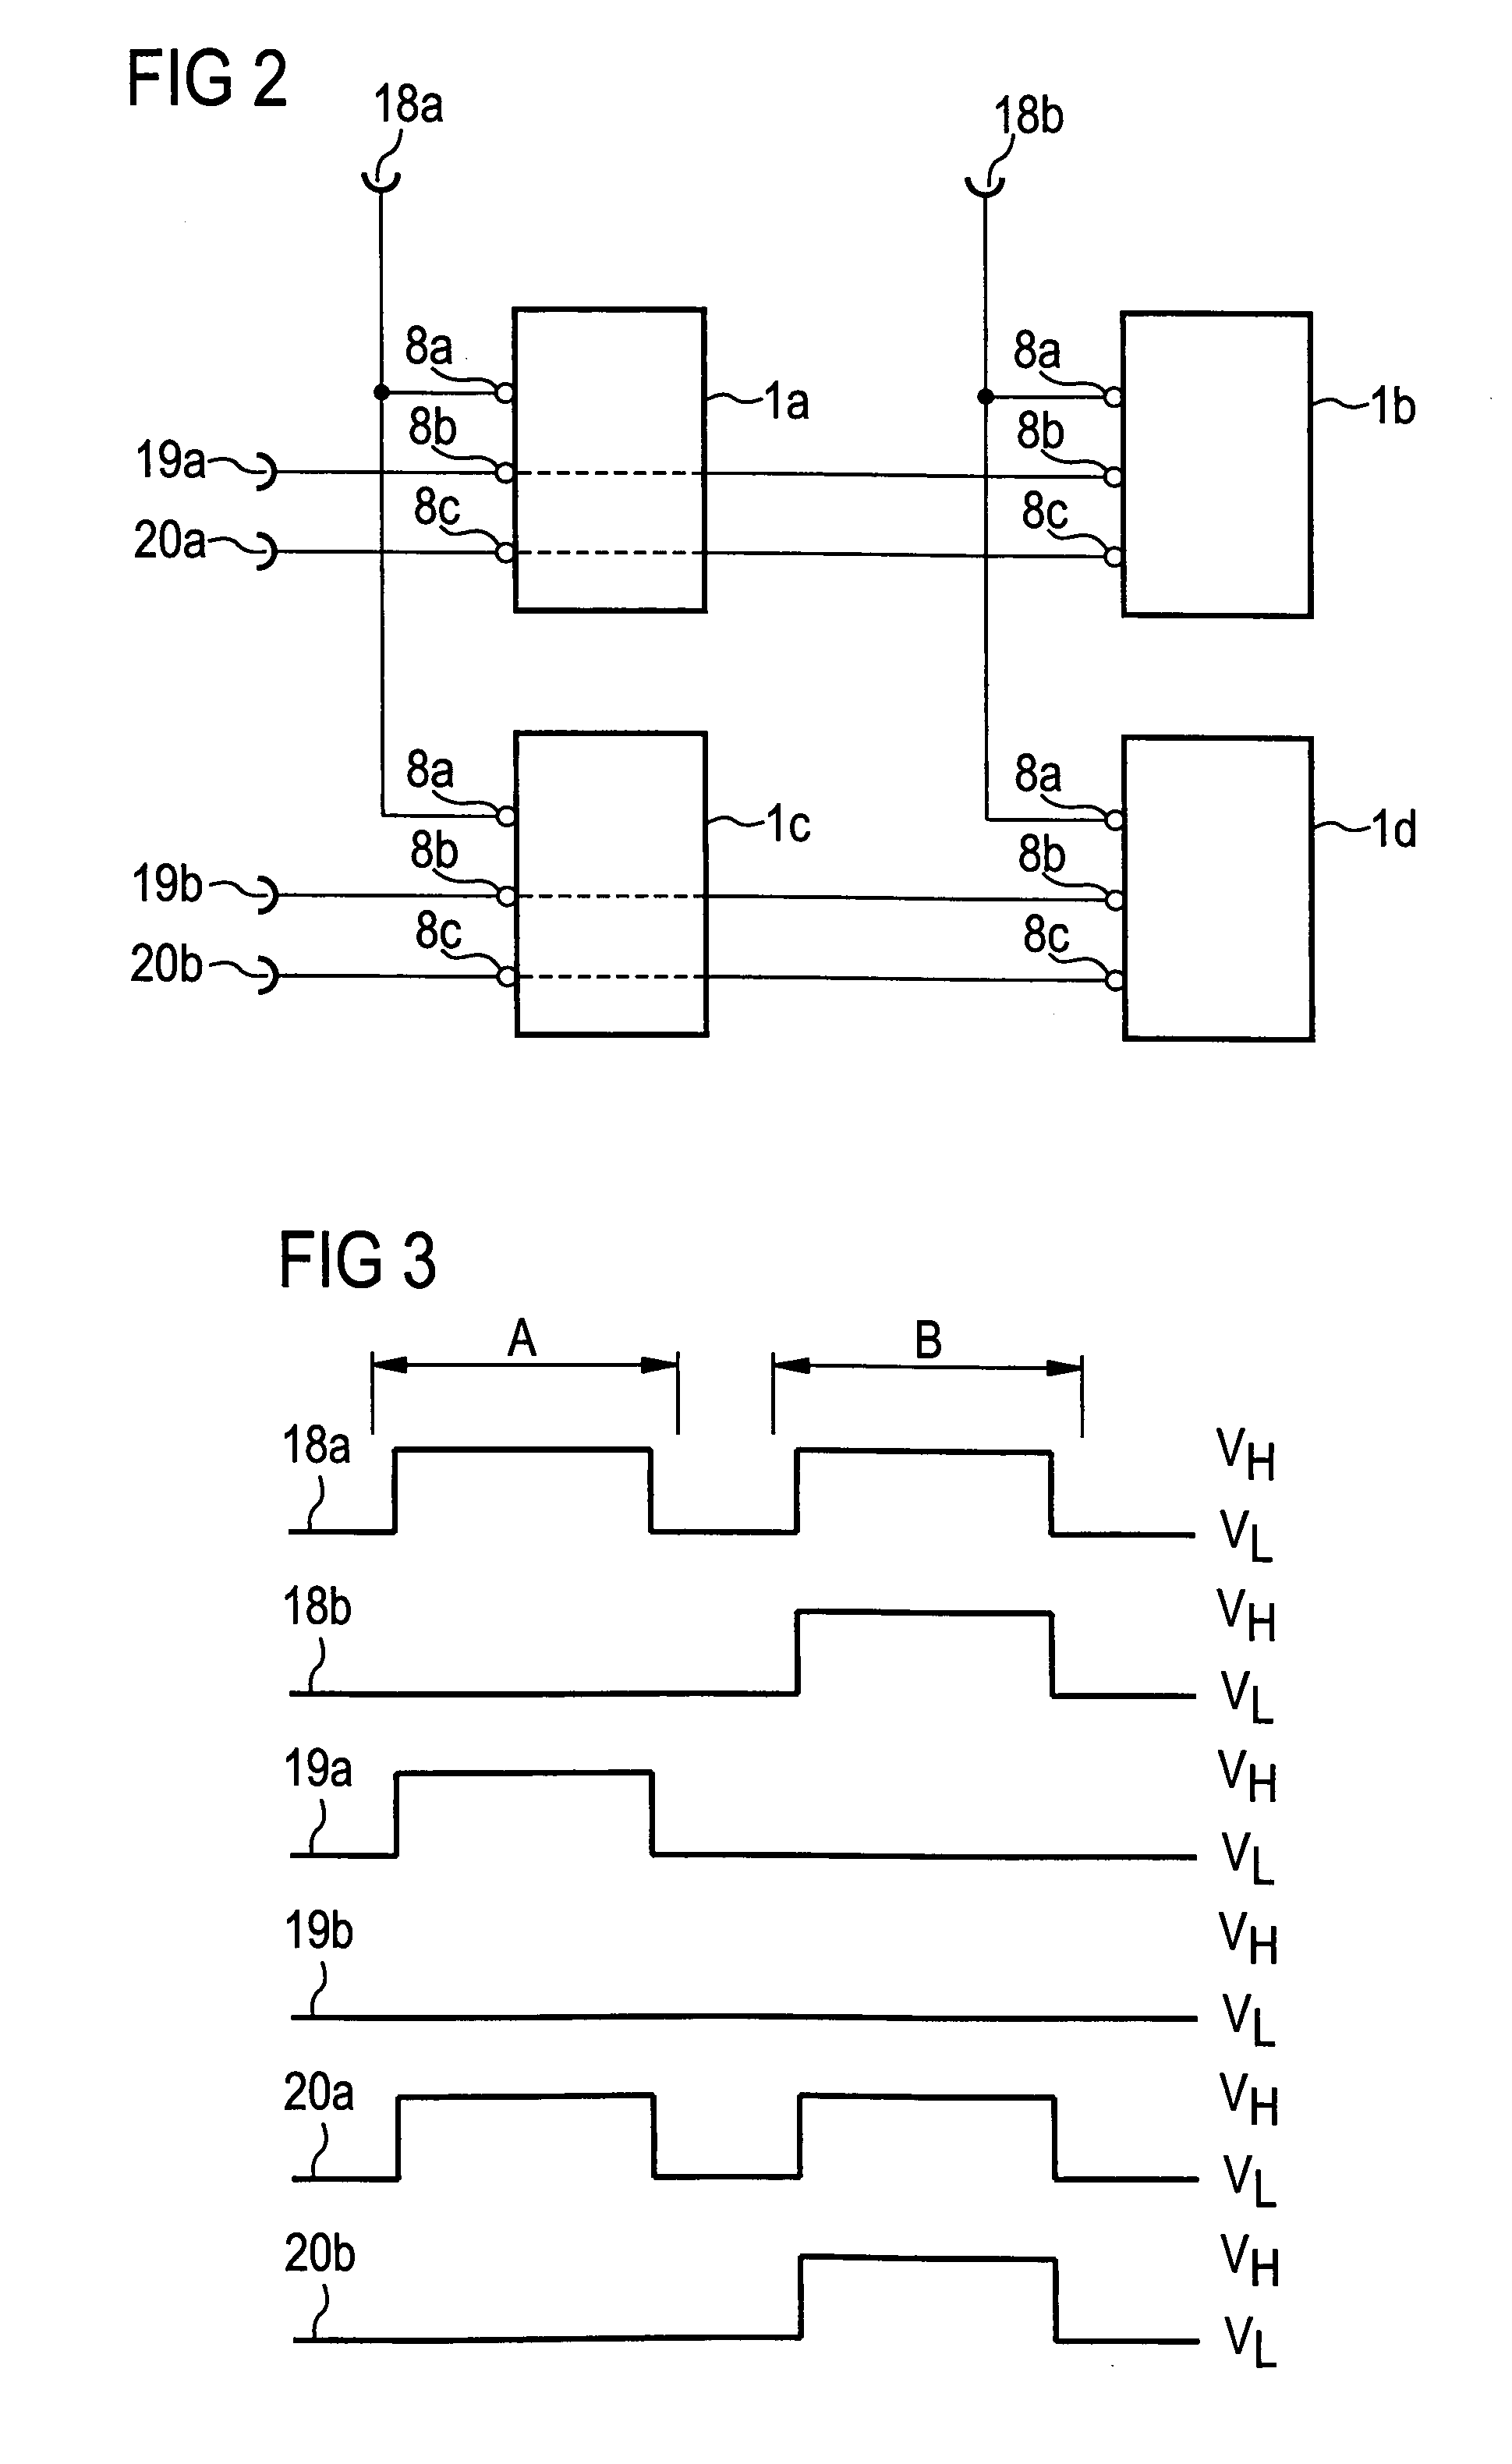 Integrated circuit with a control input that can be disabled